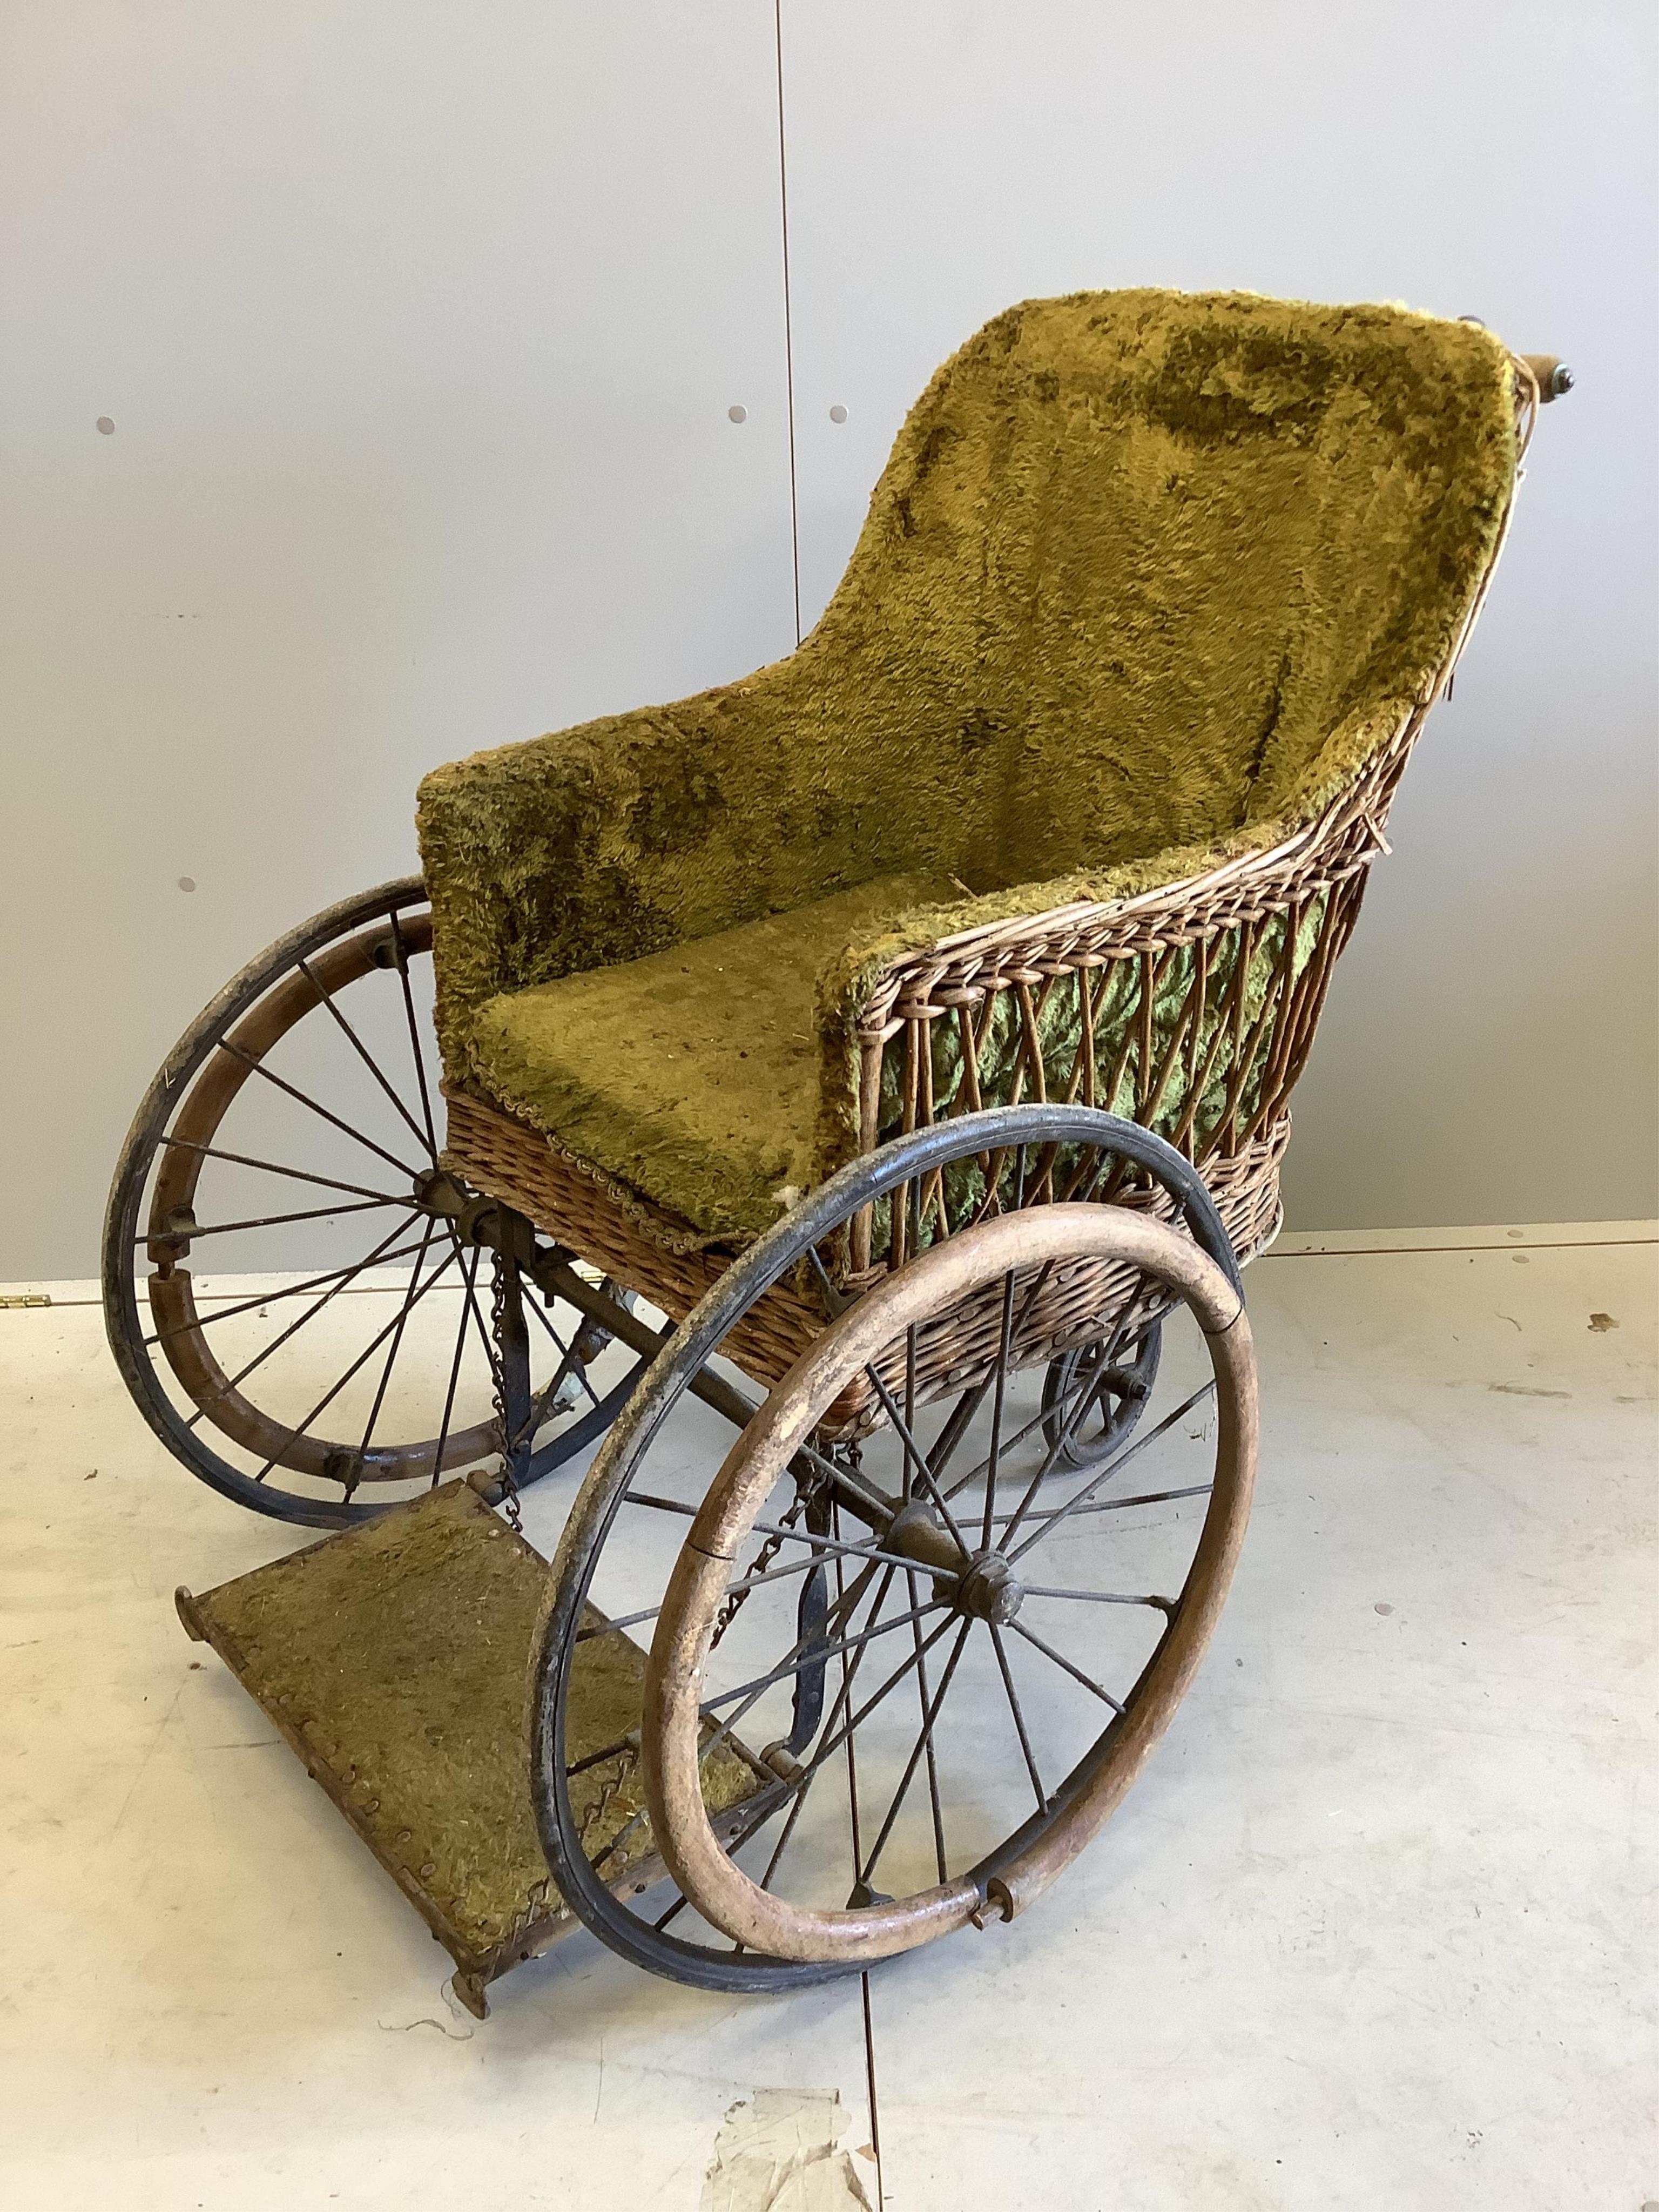 A late Victorian invalid's chair by Fry & Sons, height 100cm. Condition - fair